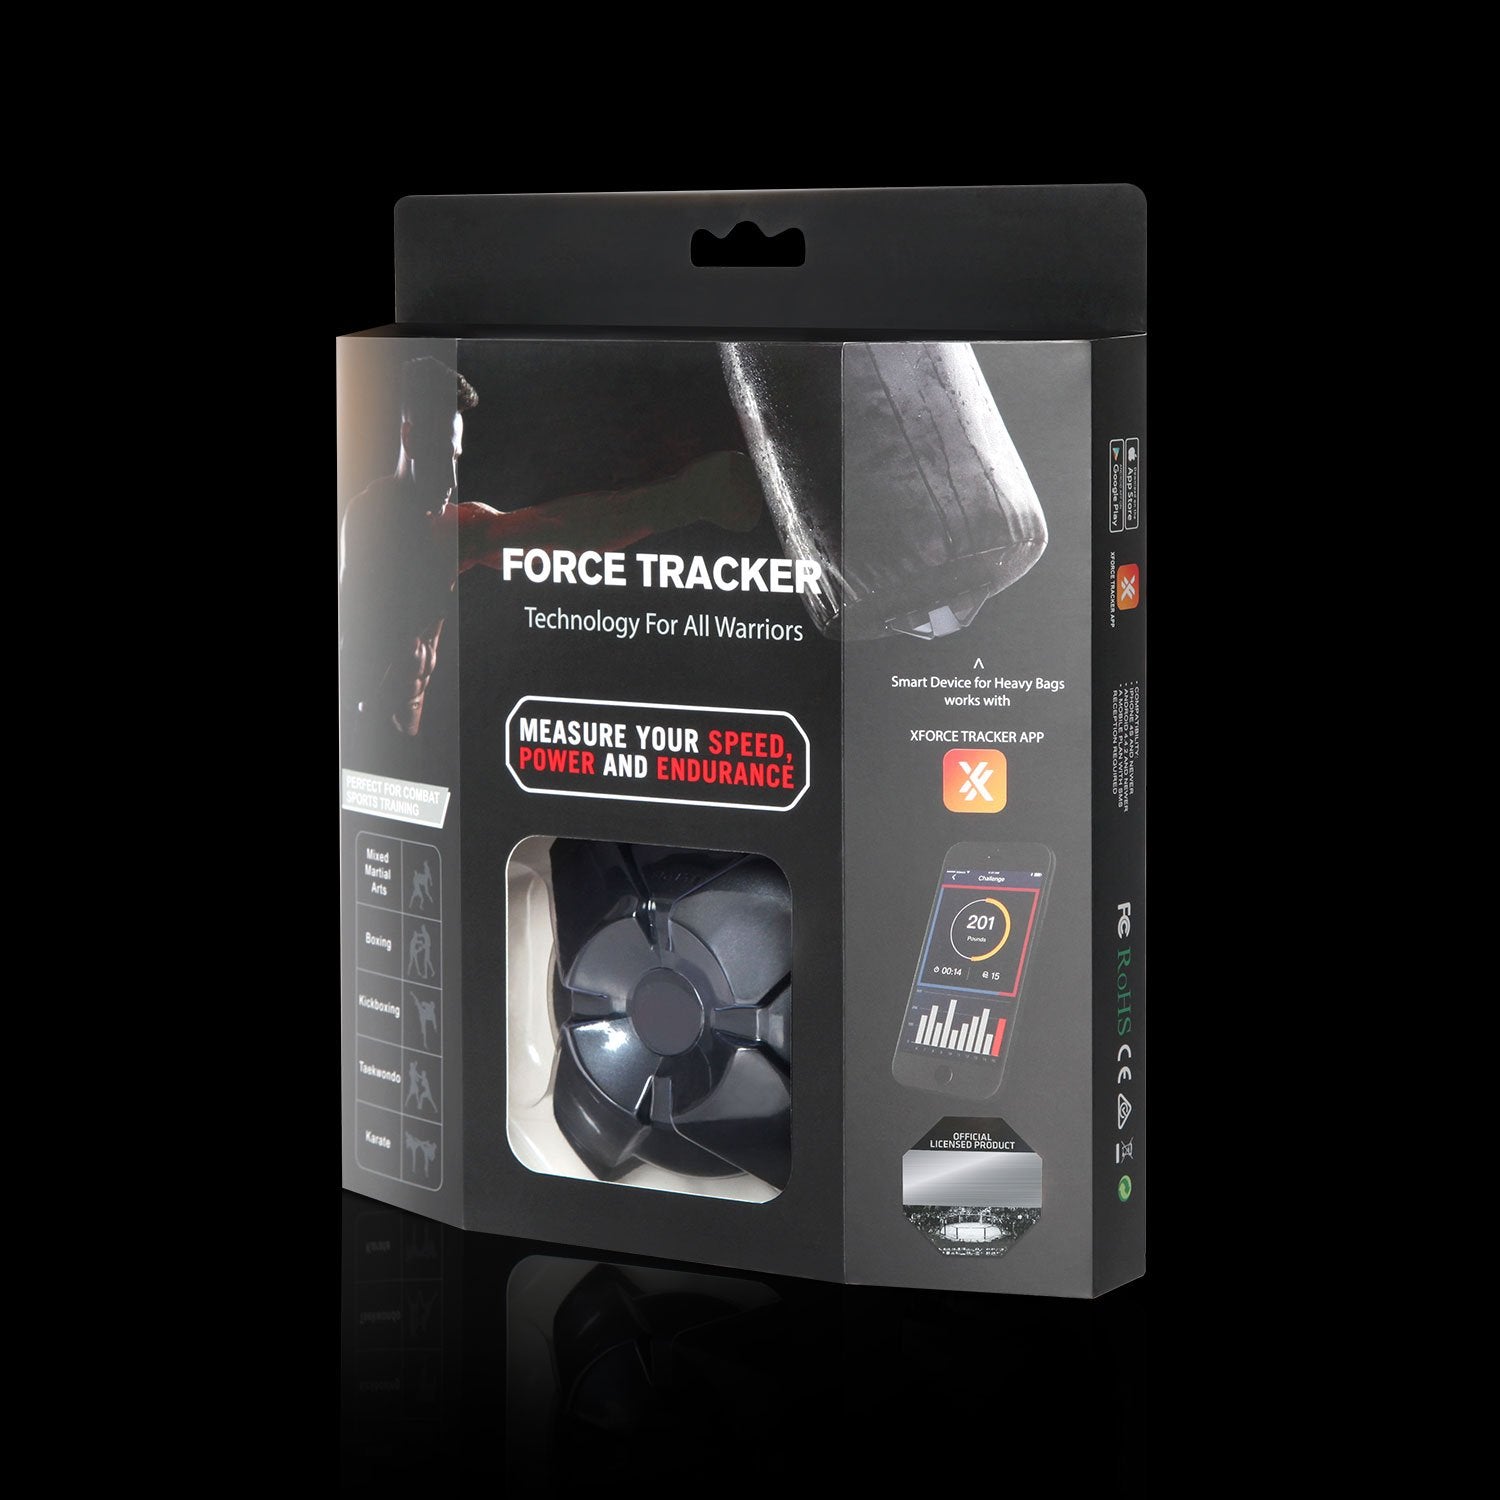 Force Tracker ,Speed & Power Sensors Training Equipment - Boxing Gifts for Punch & Kick, Gym, Fitness, MMA Fight